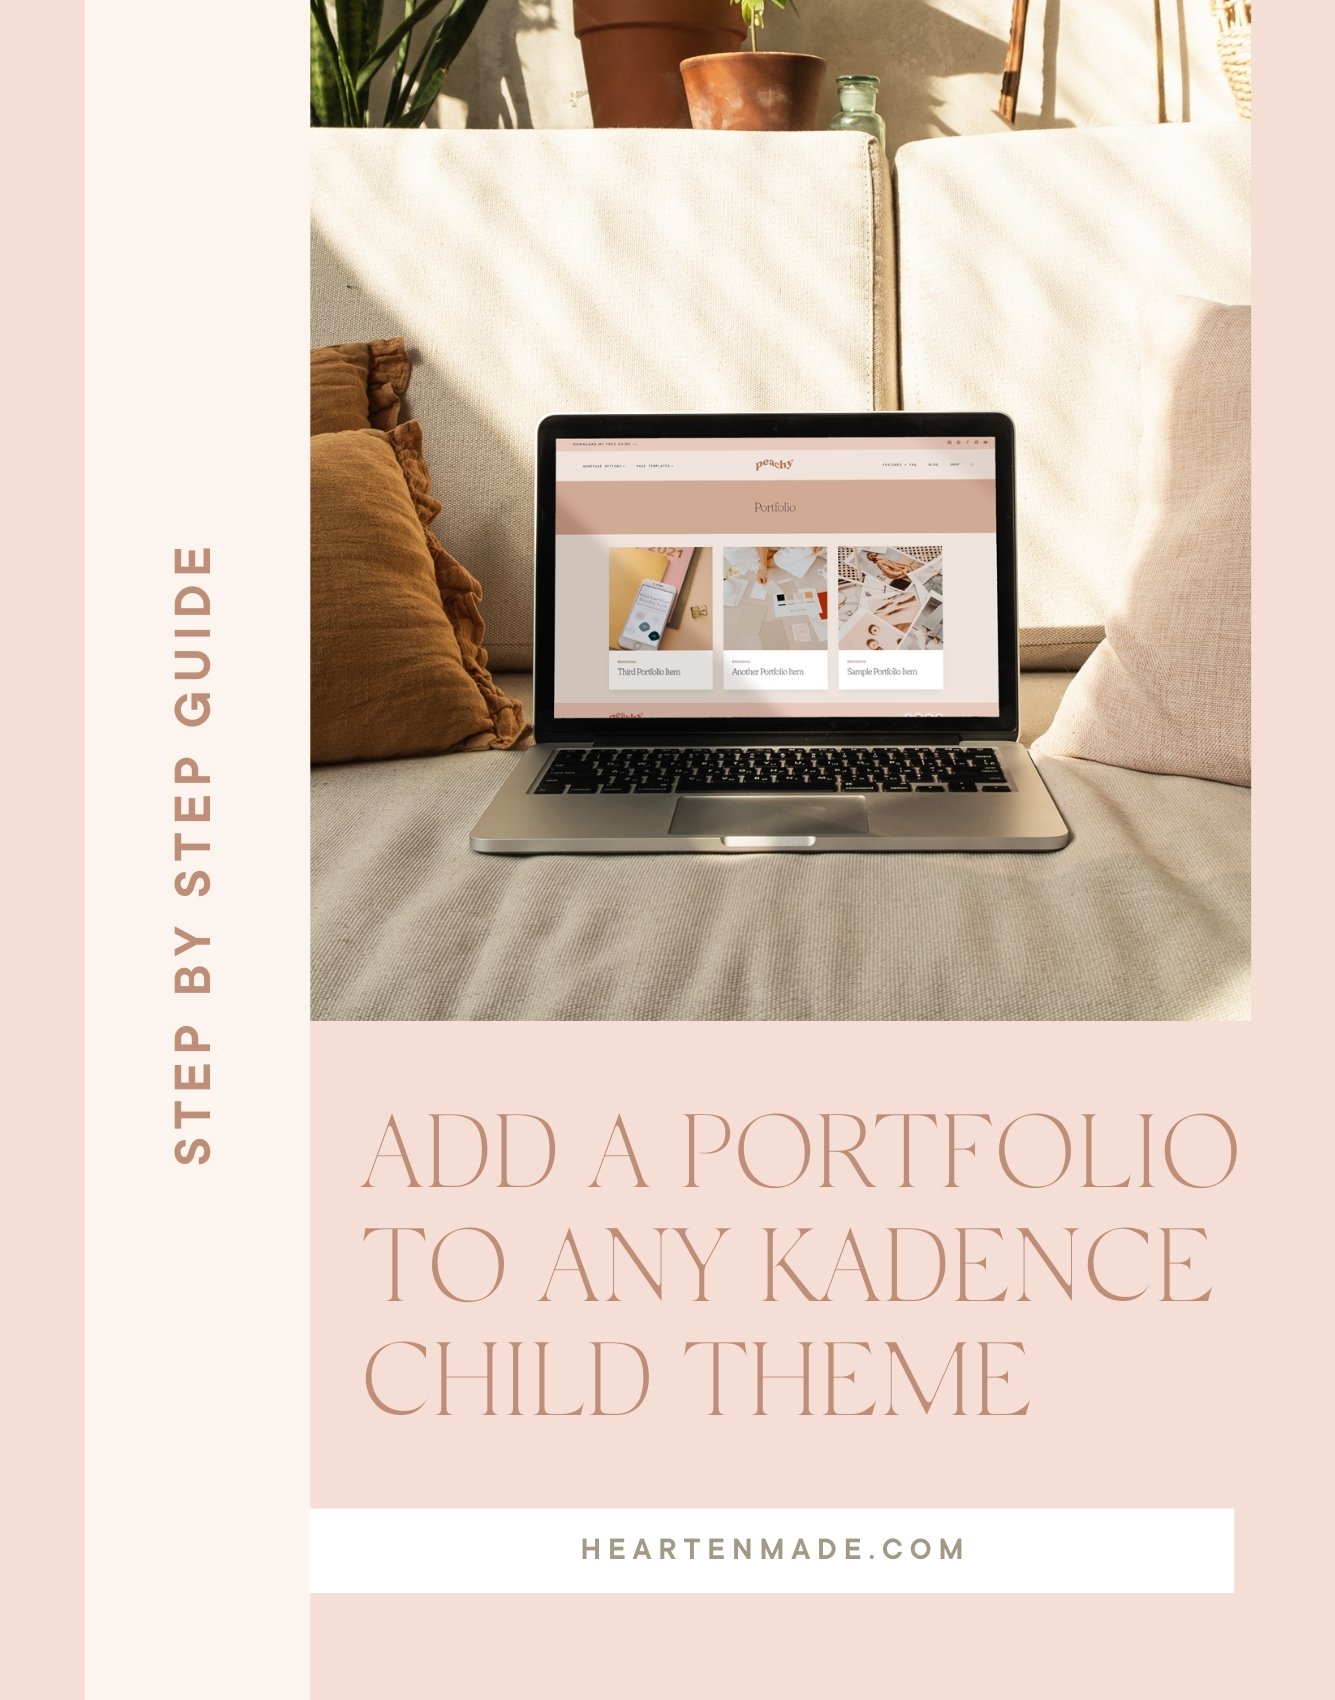 How to Add a Portfolio to any Kadence Child Theme in Under 5 Minutes